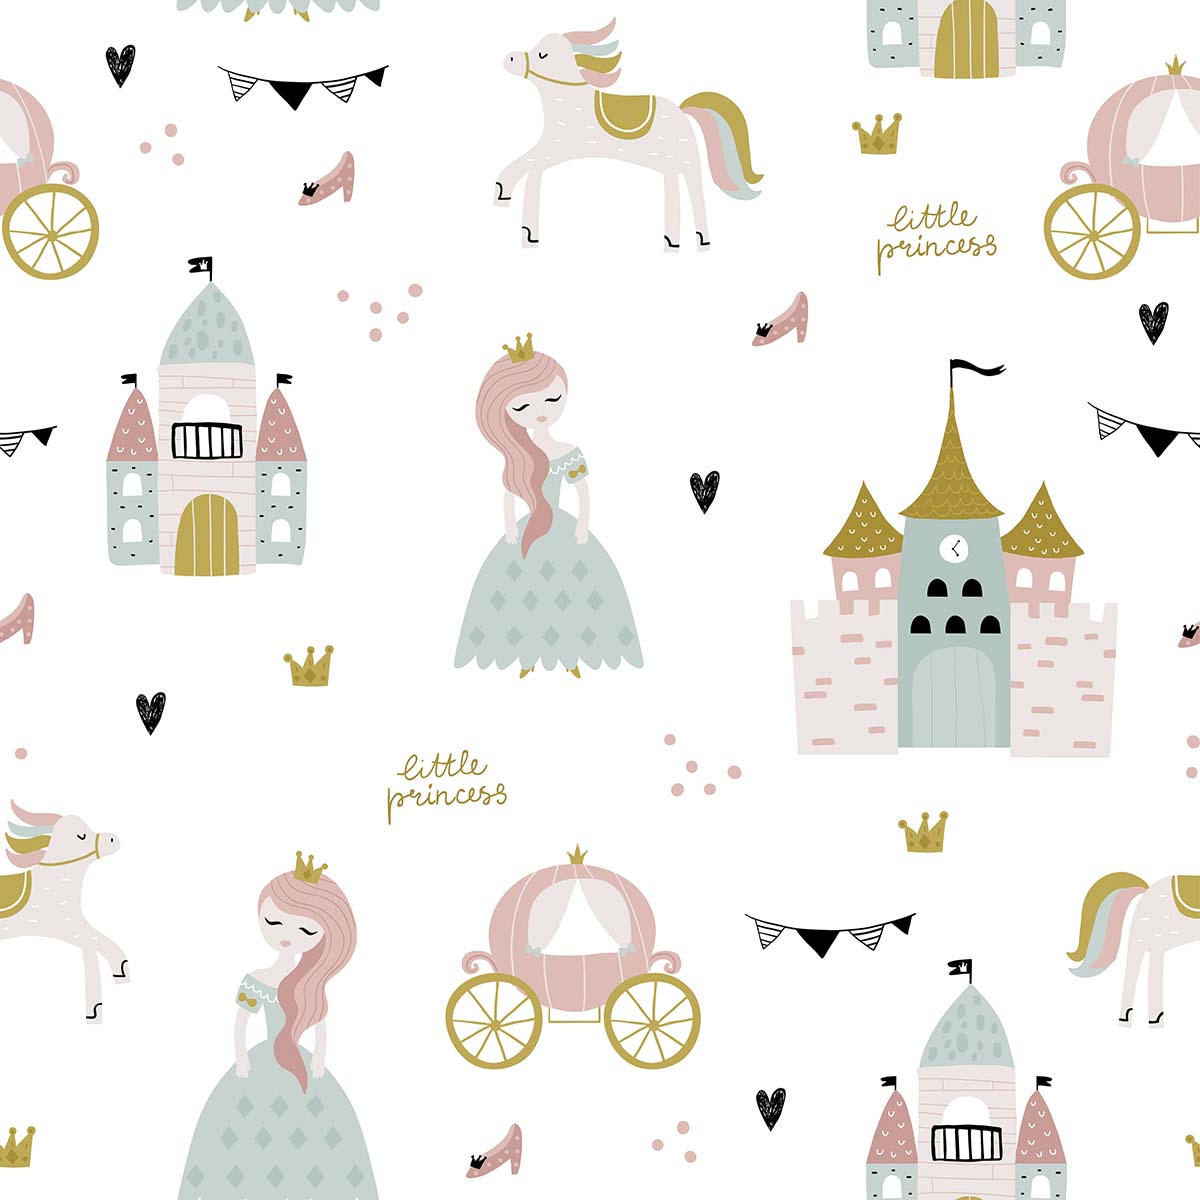 A pattern of princesses and castles